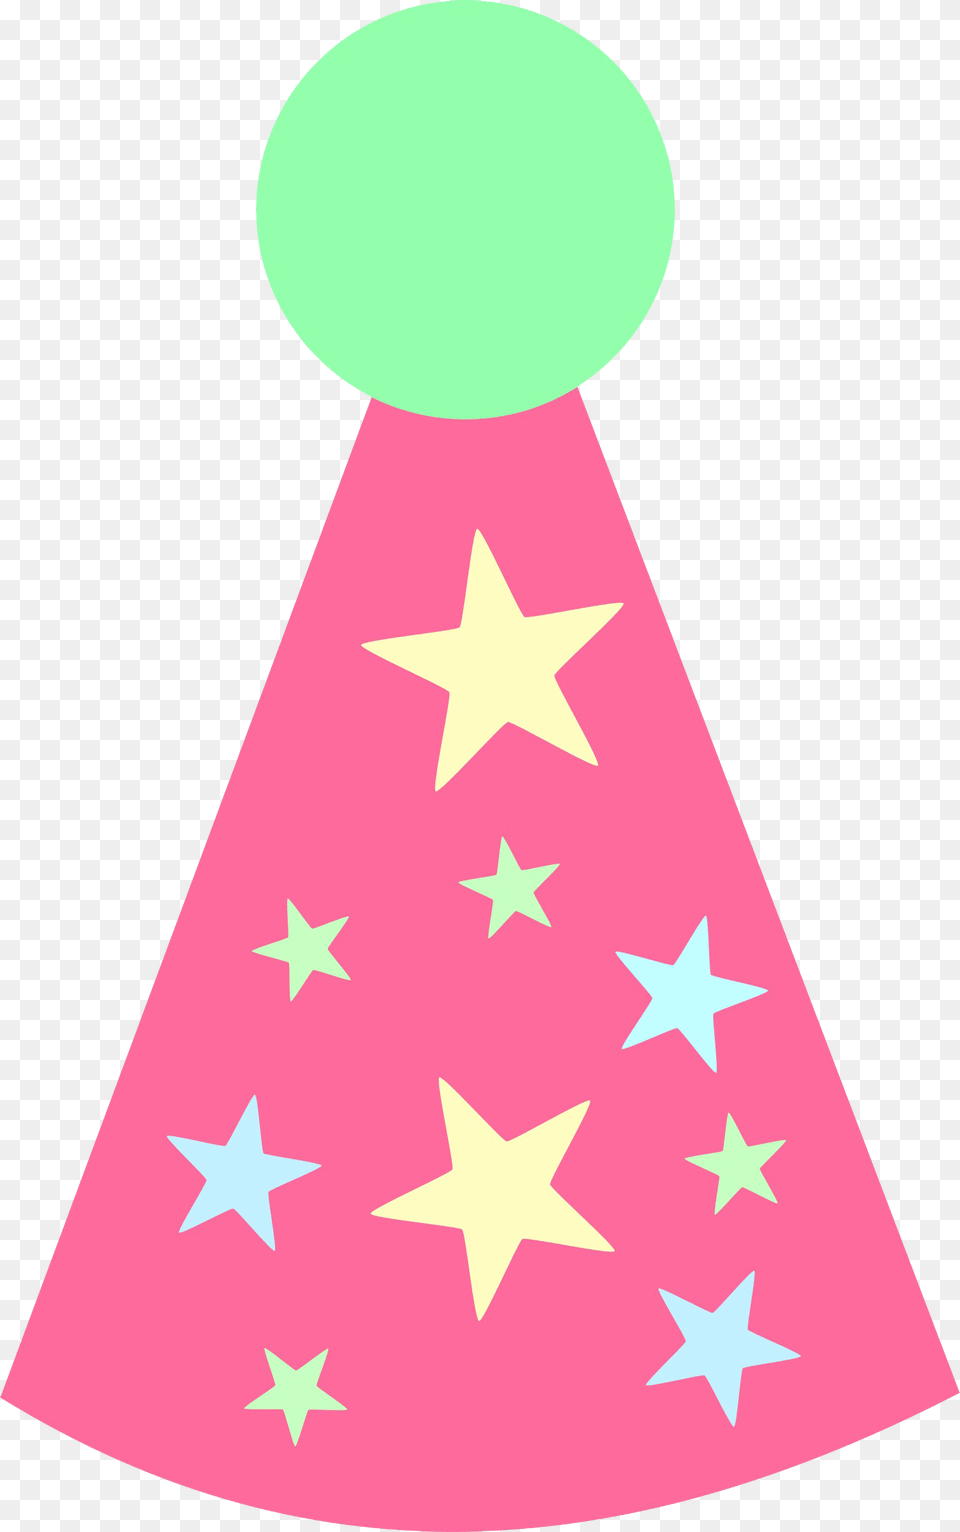 Birthday Hat Transparent Image Party Hat Cartoon, Clothing, Party Hat, Flag Free Png Download